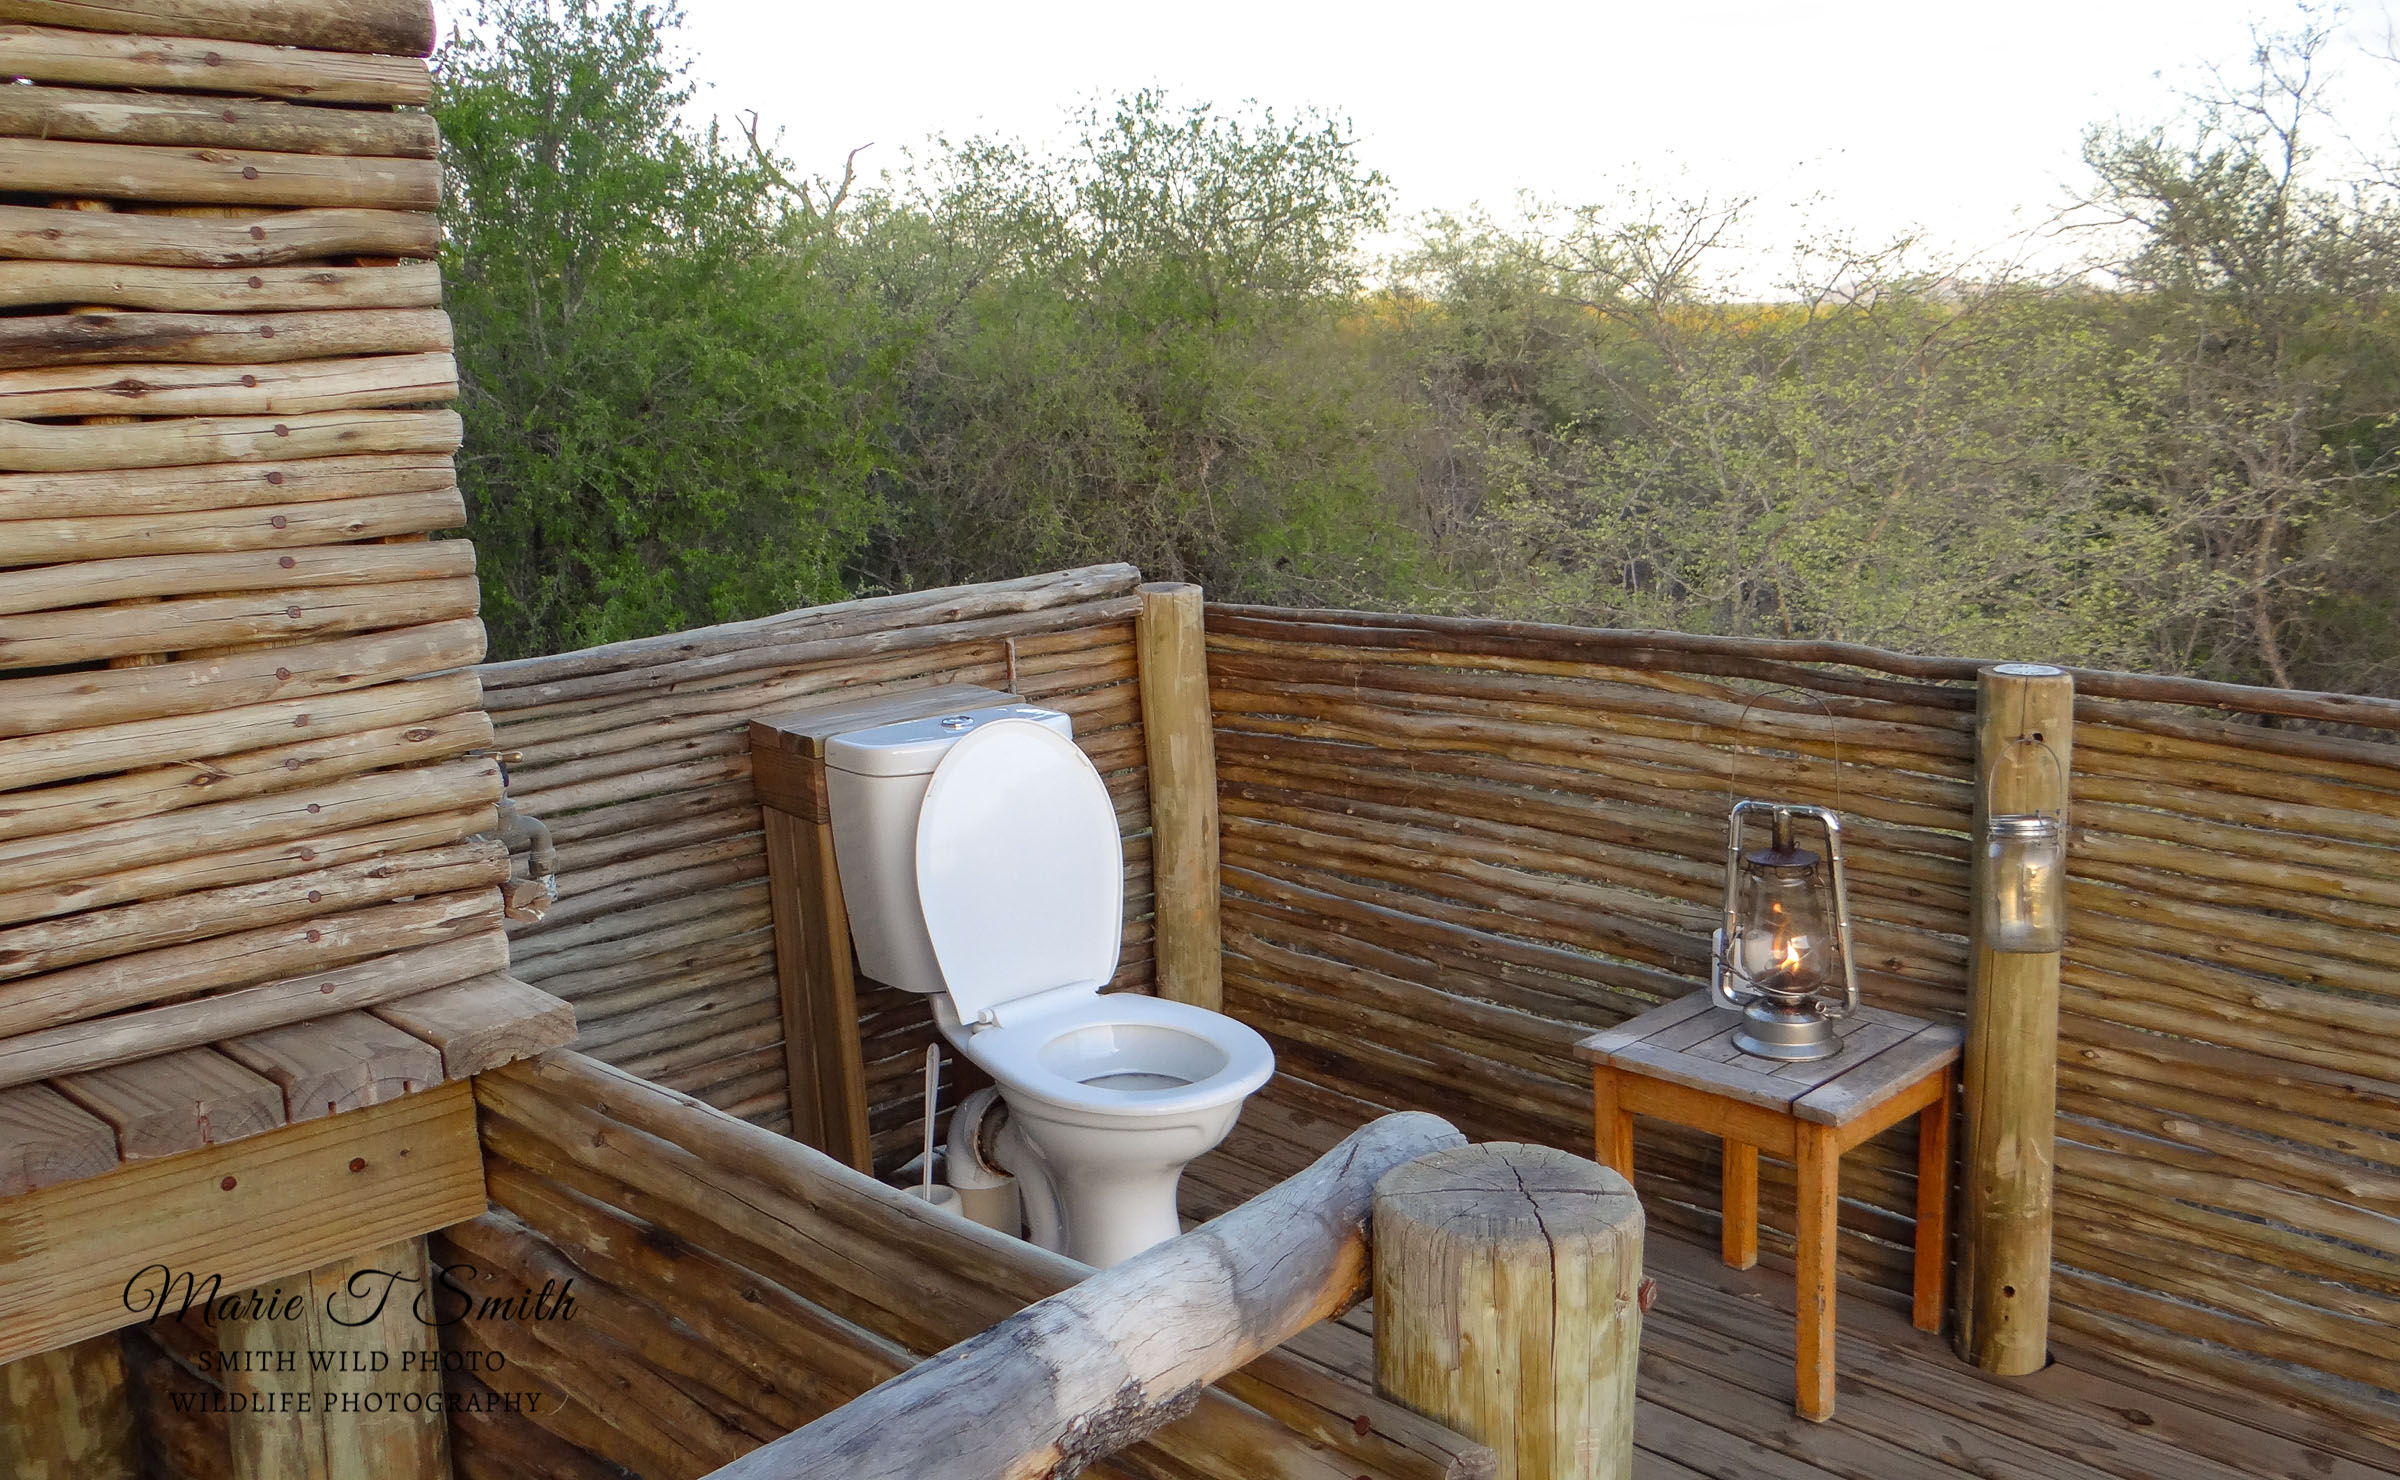 Toilet on a decking